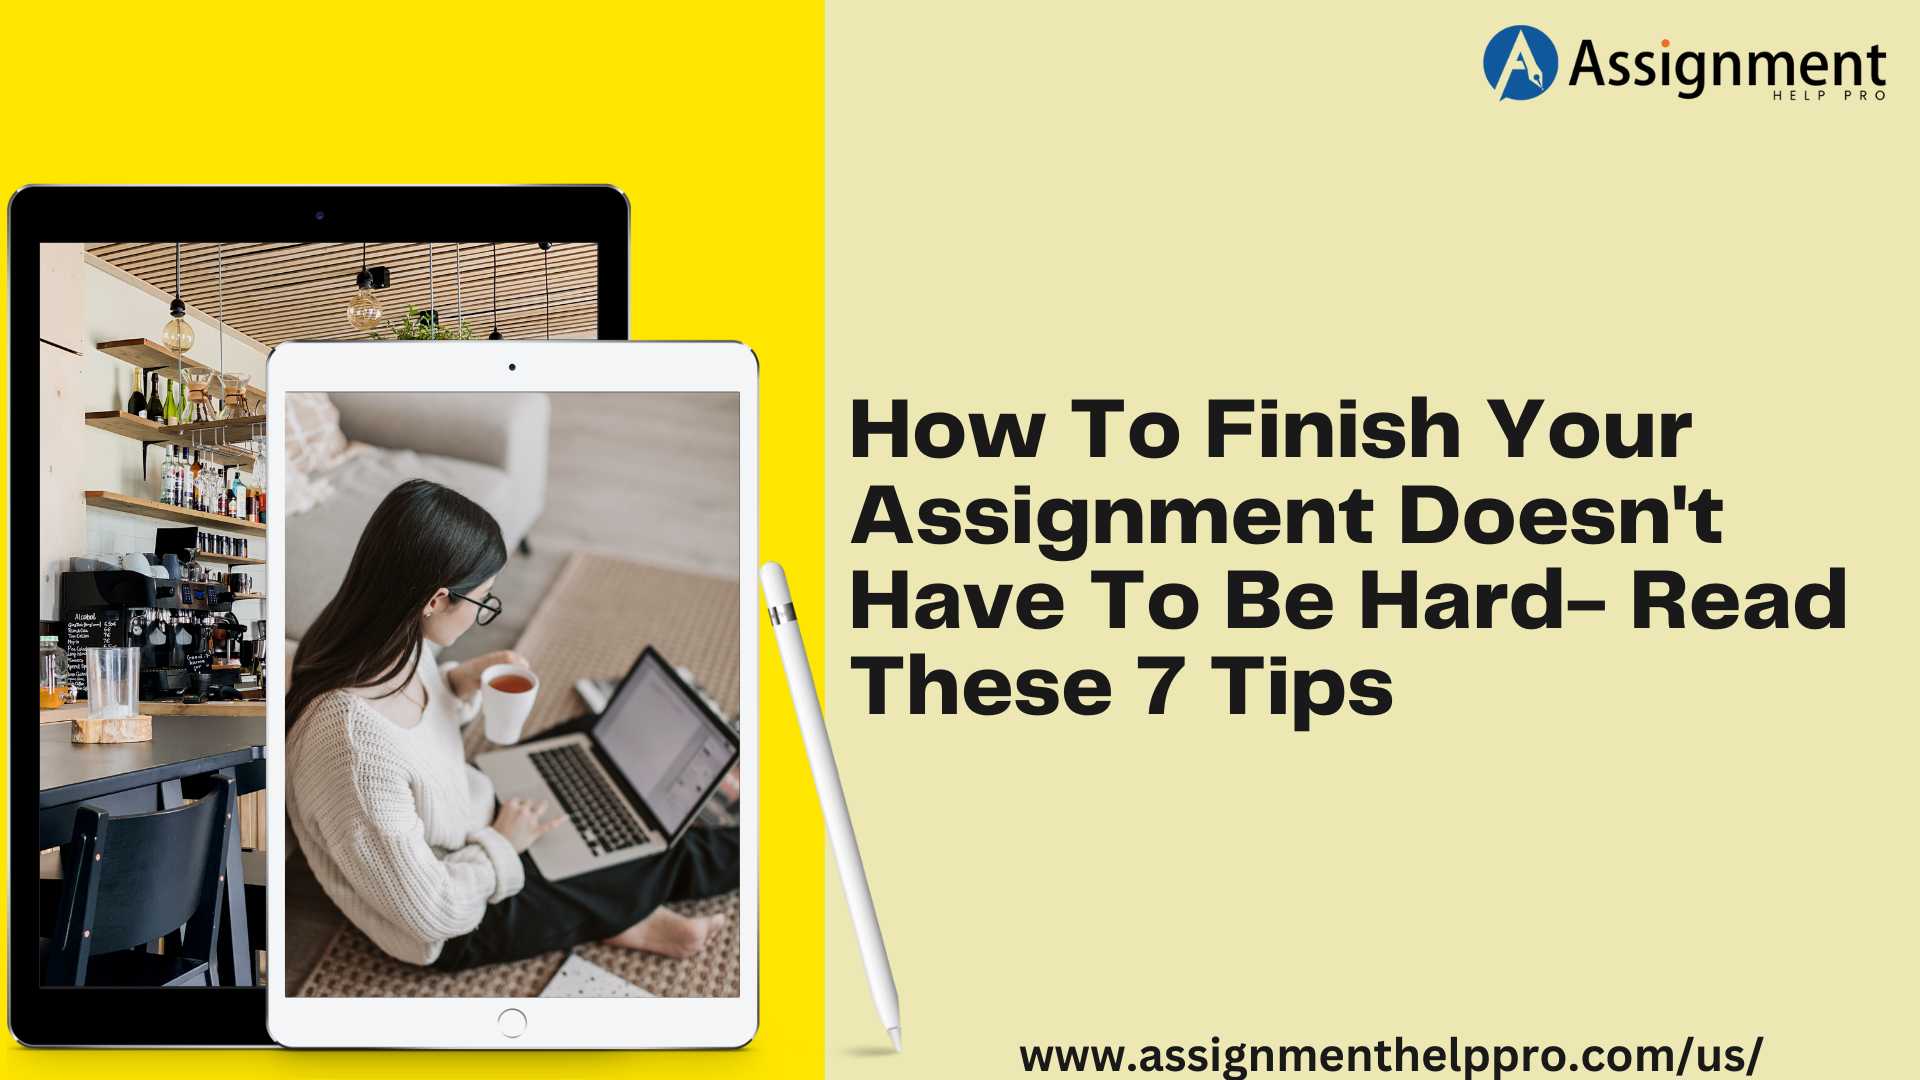 How To Finish Your Assignment Doesn’t Have To Be Hard- Read These 7 Tips